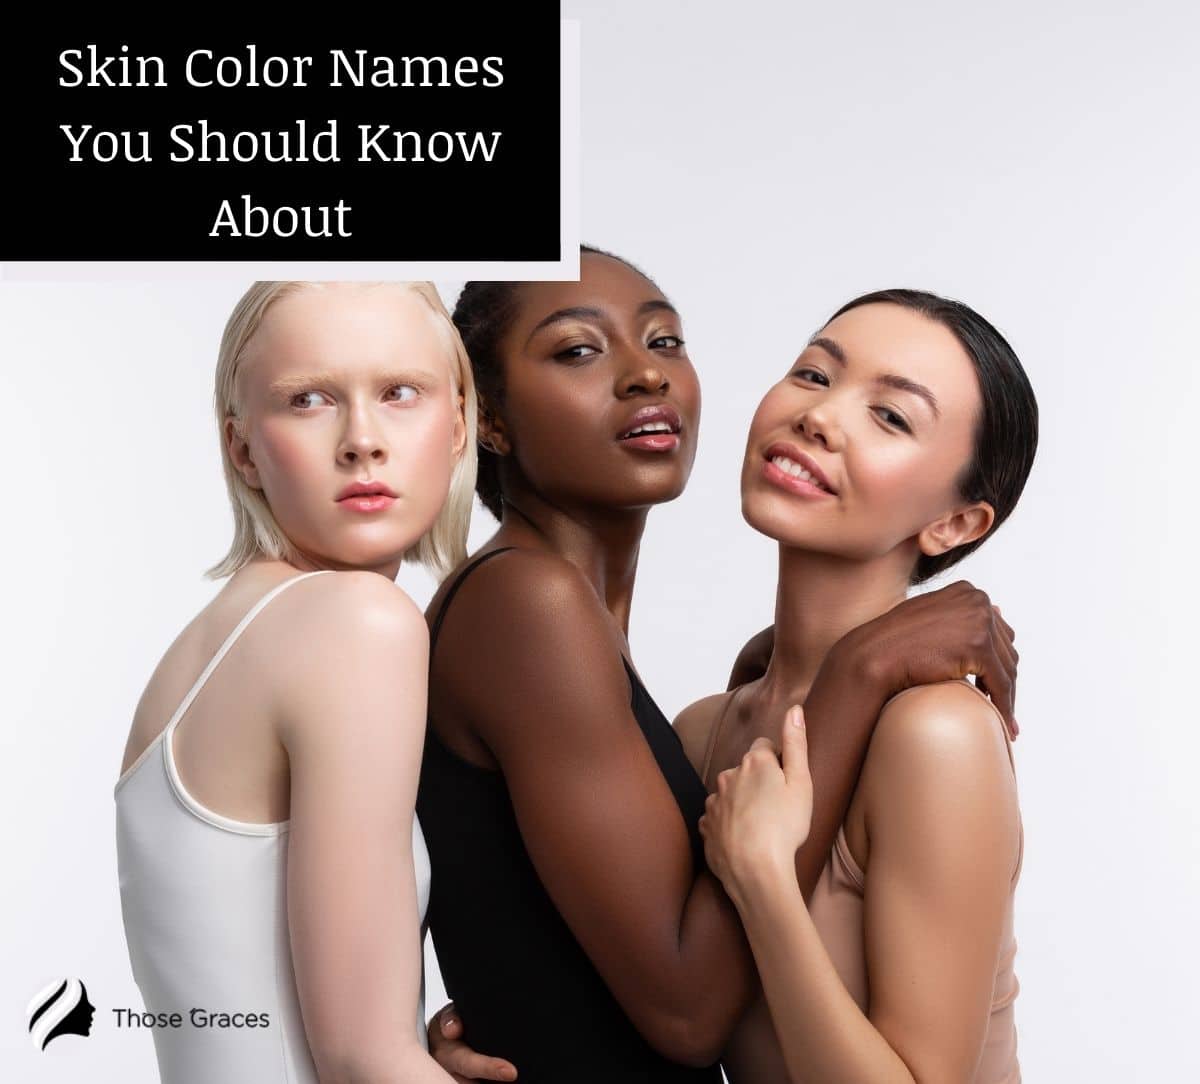 Girls with different skin color names you should know about